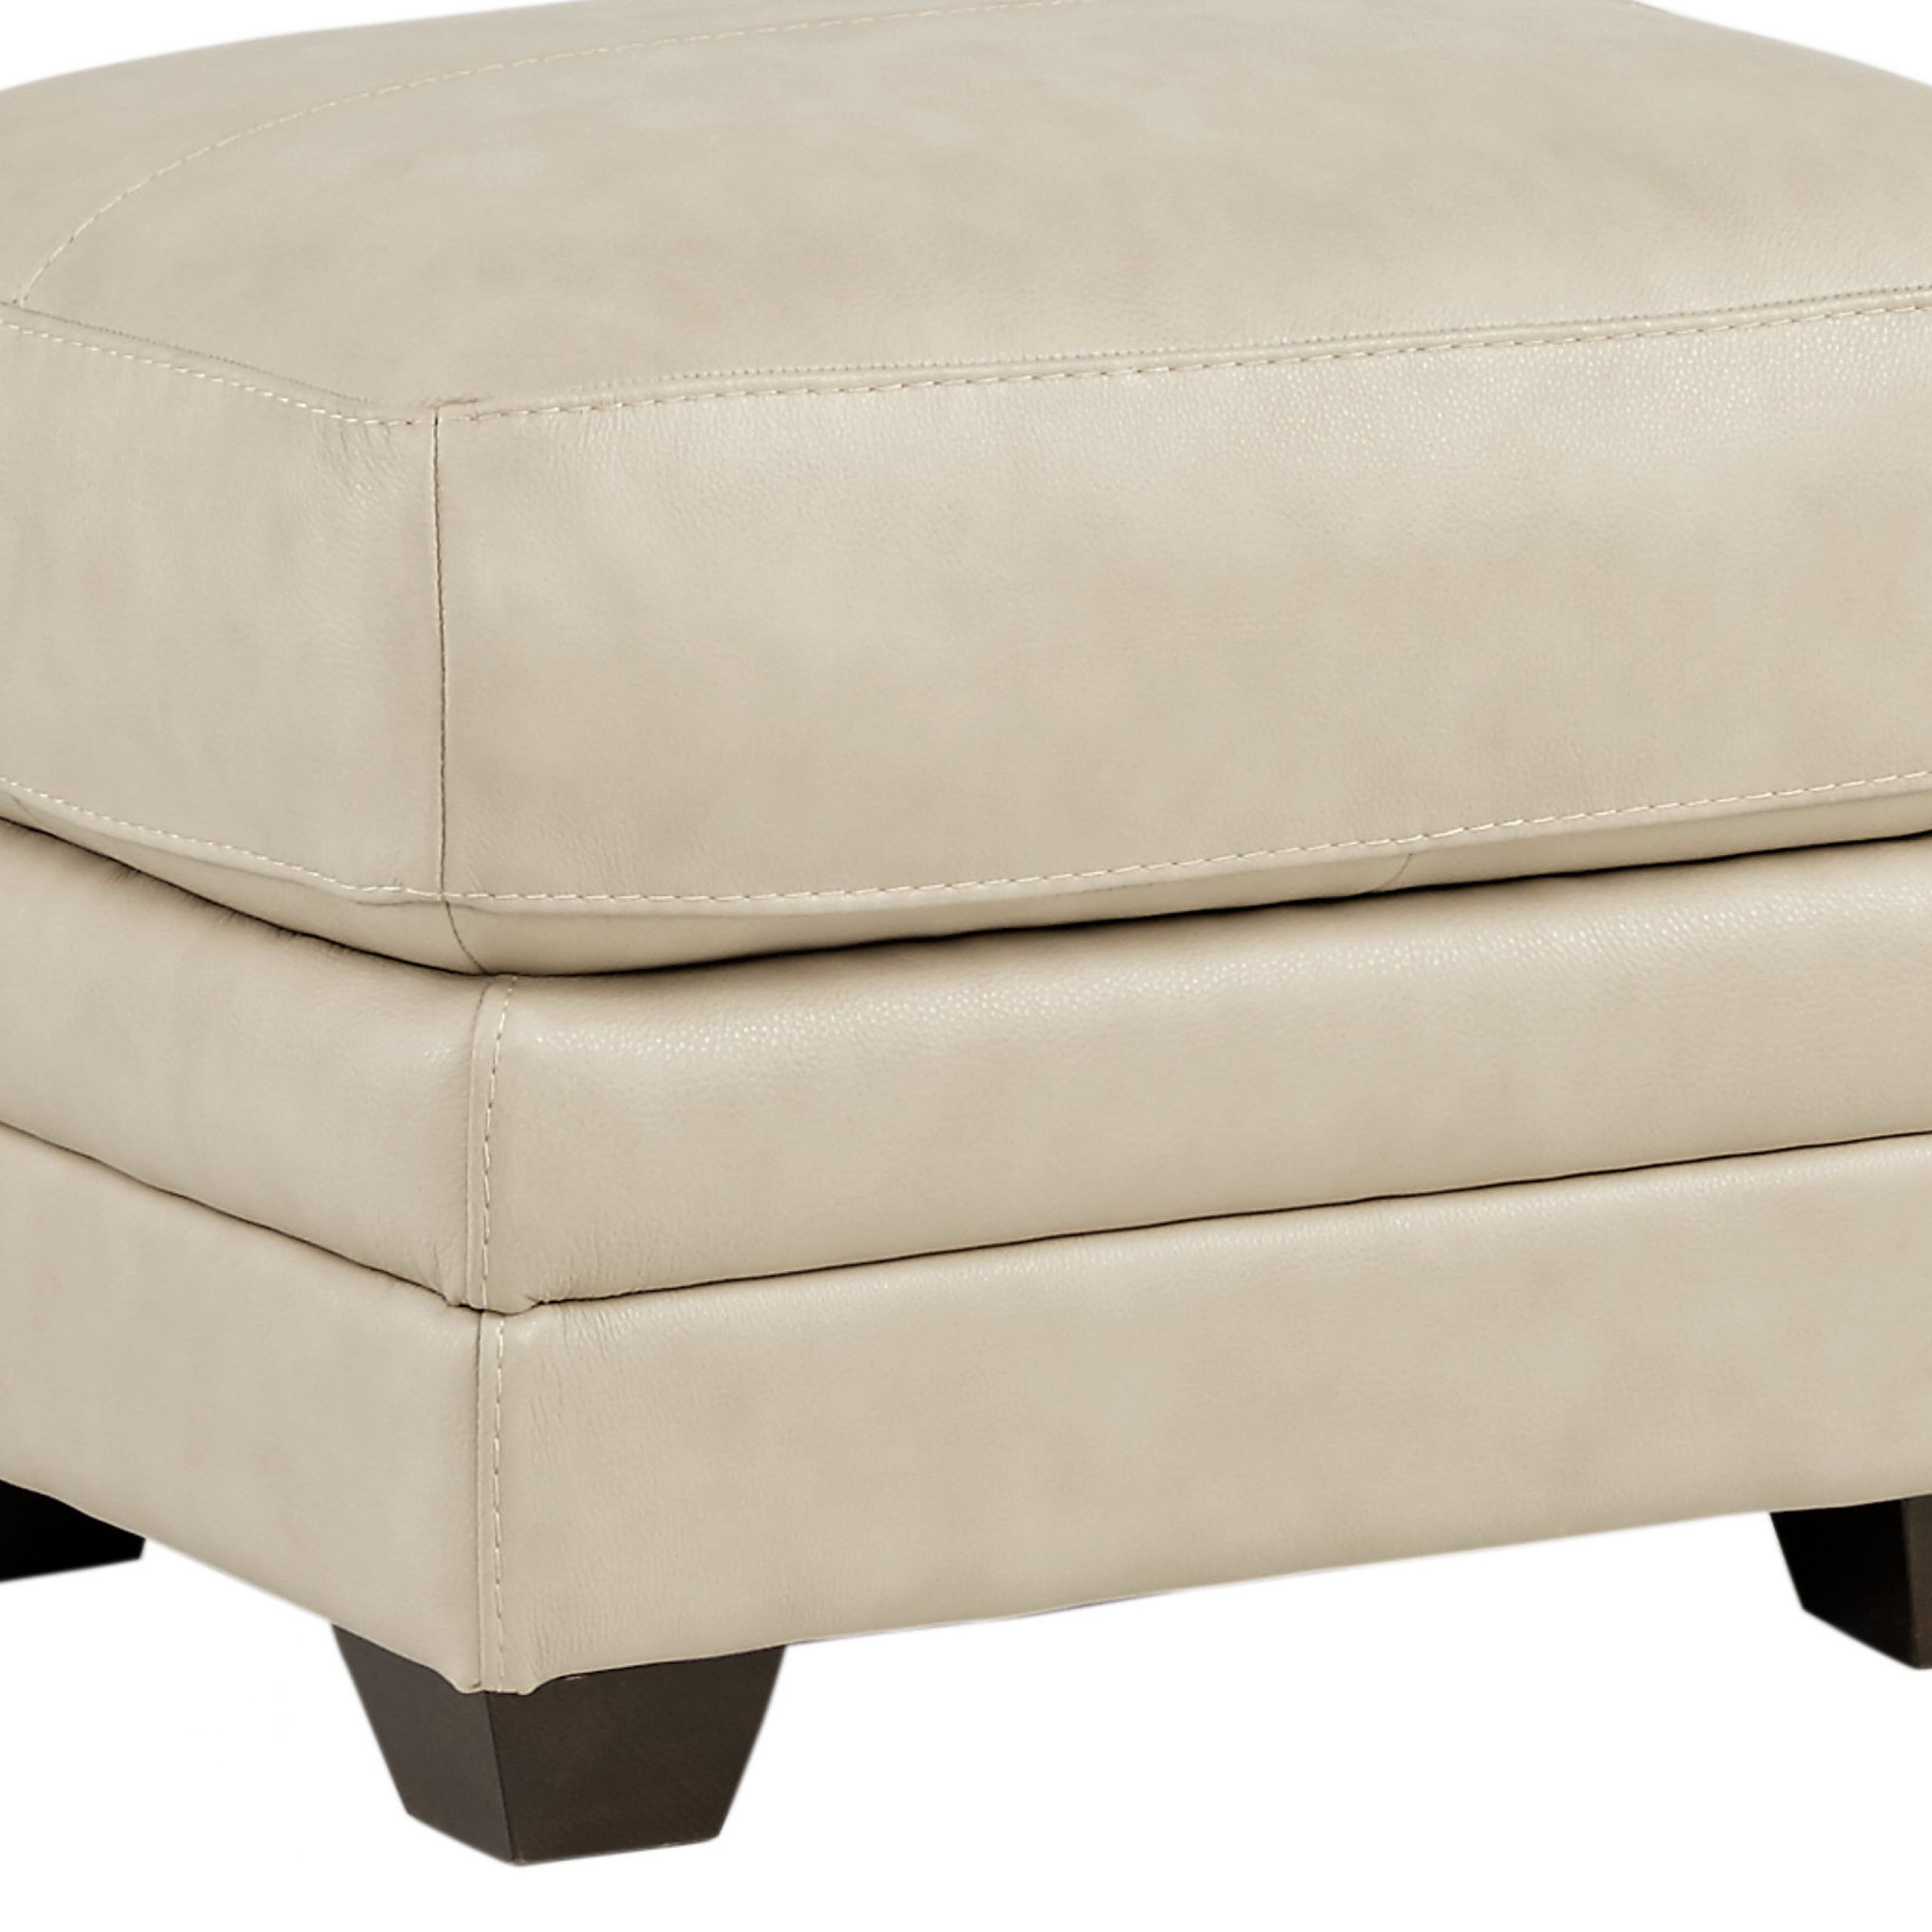 Martello Beige Leather Ottoman – Transitional, With Regard To Beige Cotton Pouf Ottomans (View 16 of 20)